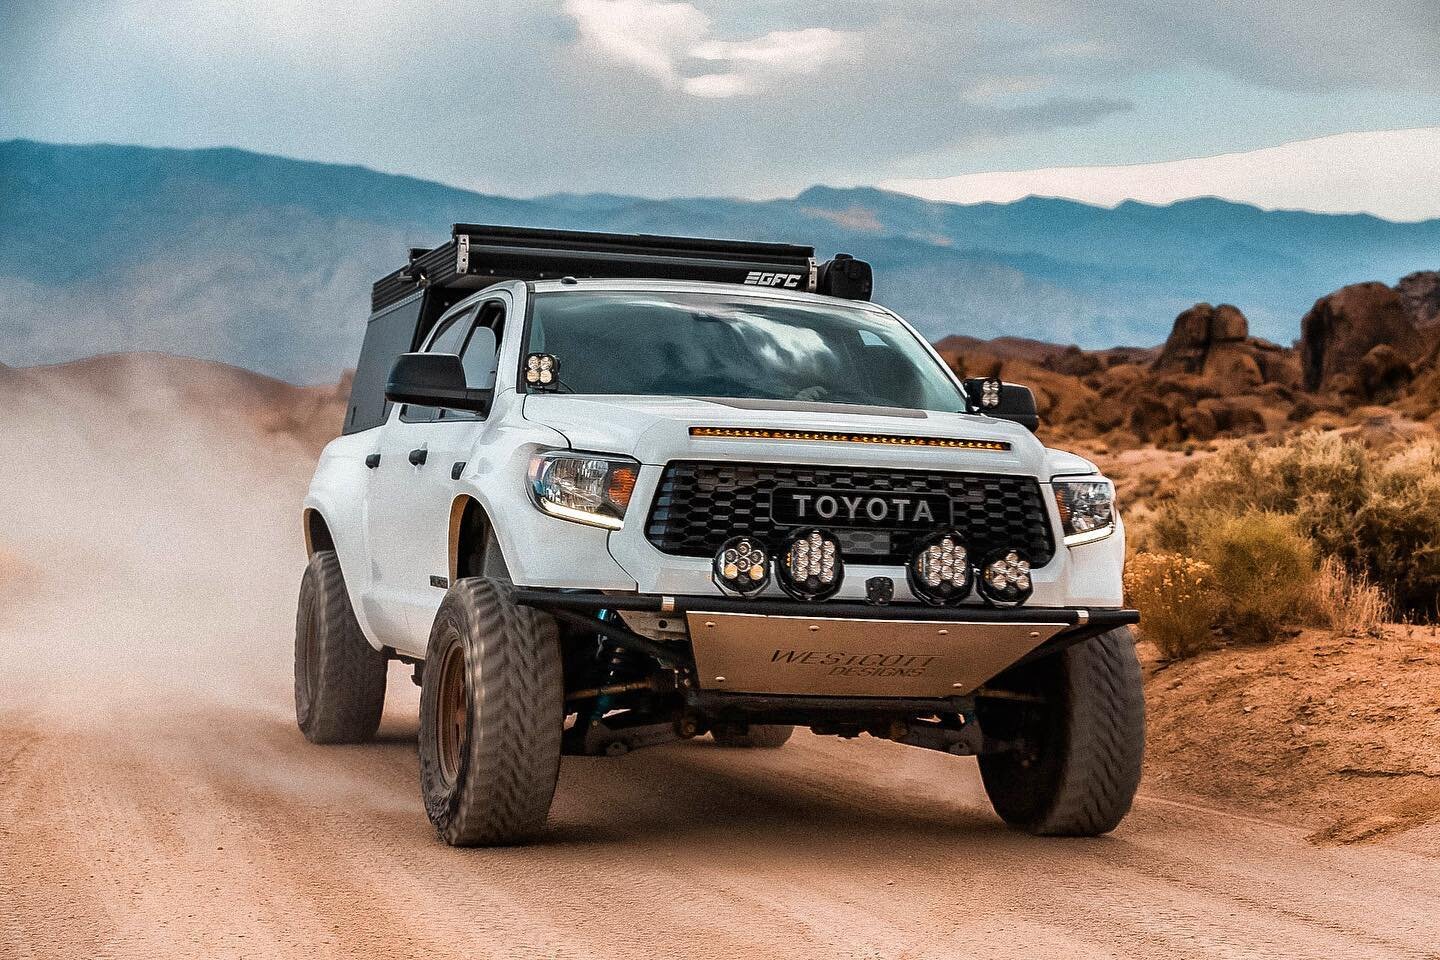 @bajadesignsofficial has been a huge supporter for this Tundra build. Don&rsquo;t get me wrong though, i&rsquo;ve purchased BajaDesign products since day one and it wasn&rsquo;t until now that i&rsquo;ve built a relationship with them. Overtime I ran